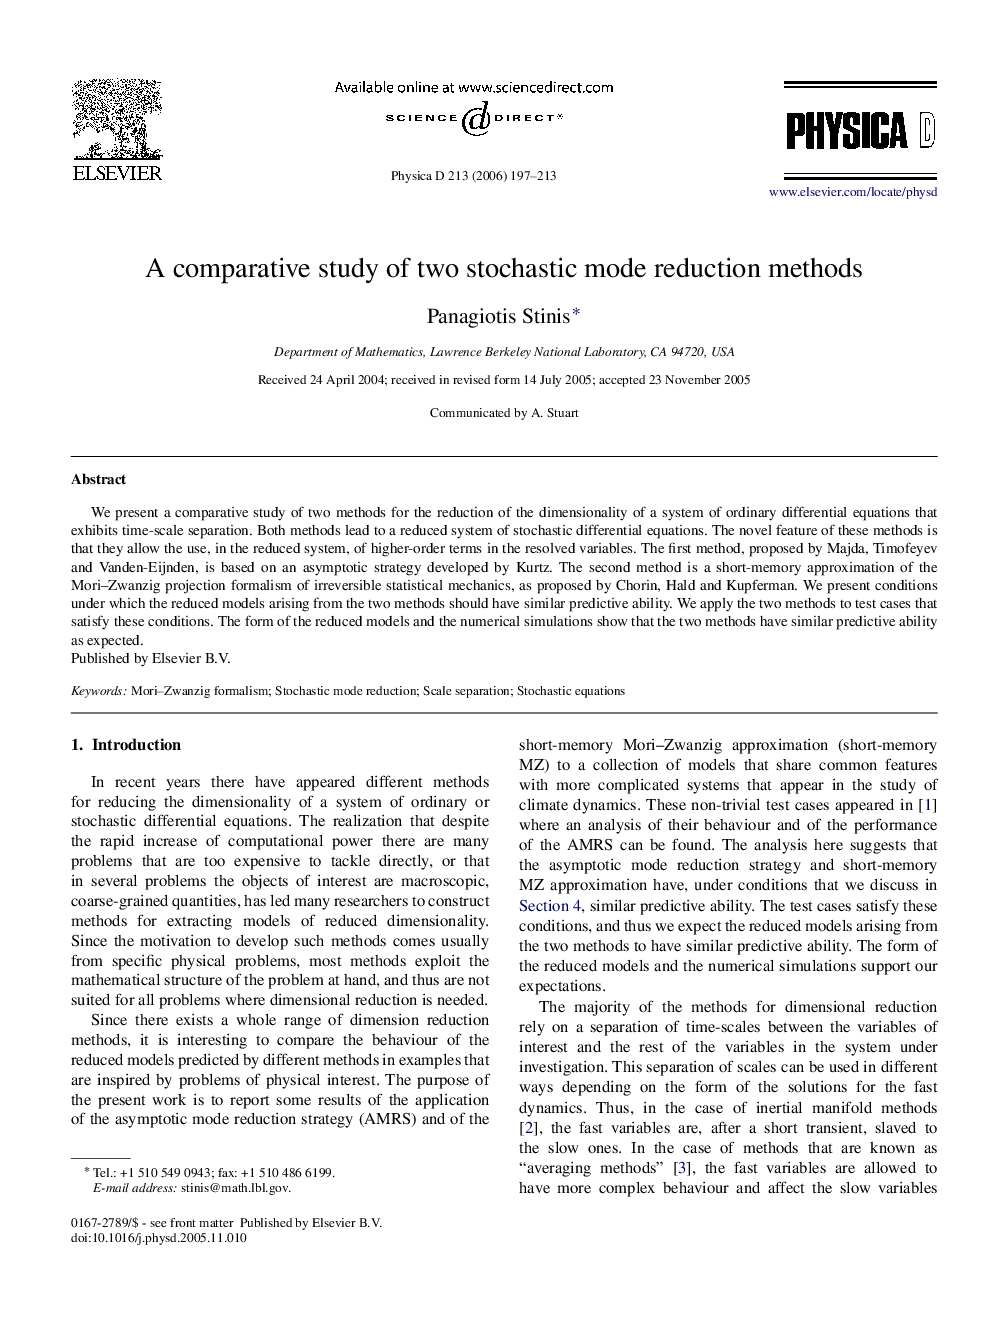 A comparative study of two stochastic mode reduction methods